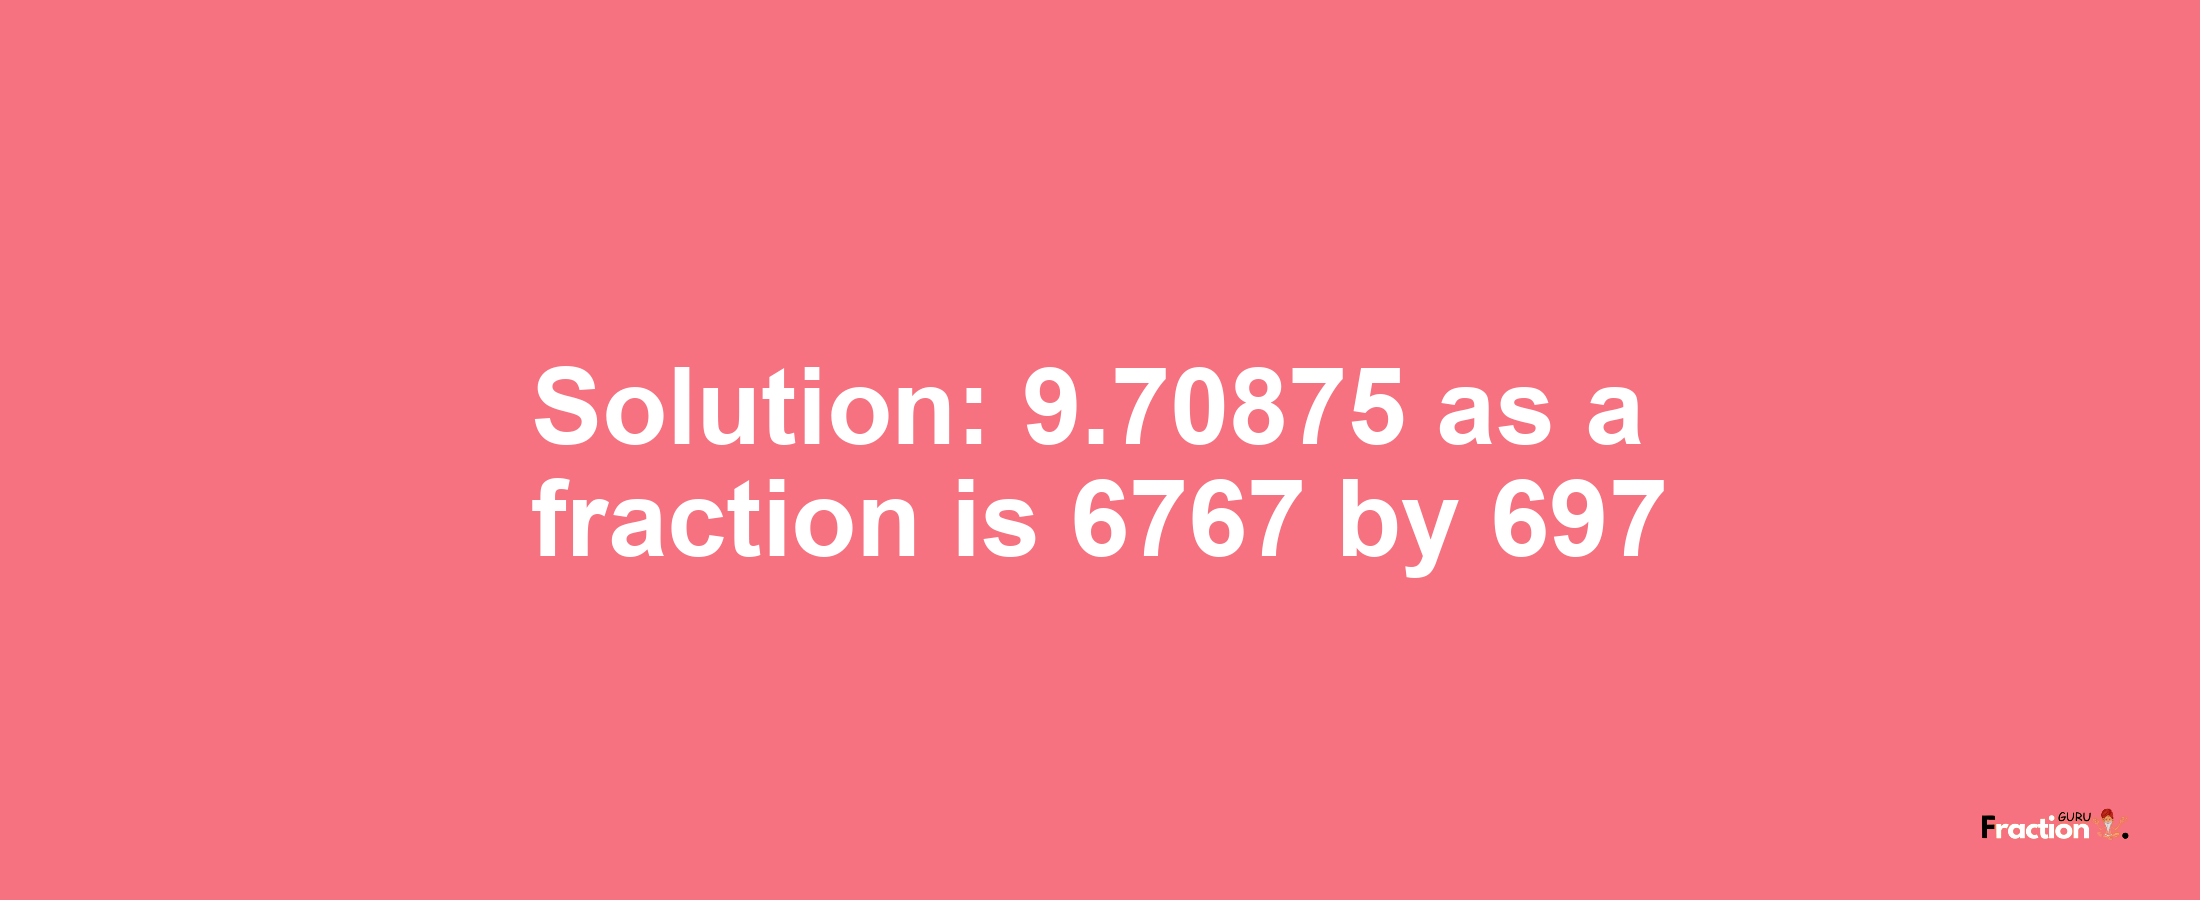 Solution:9.70875 as a fraction is 6767/697